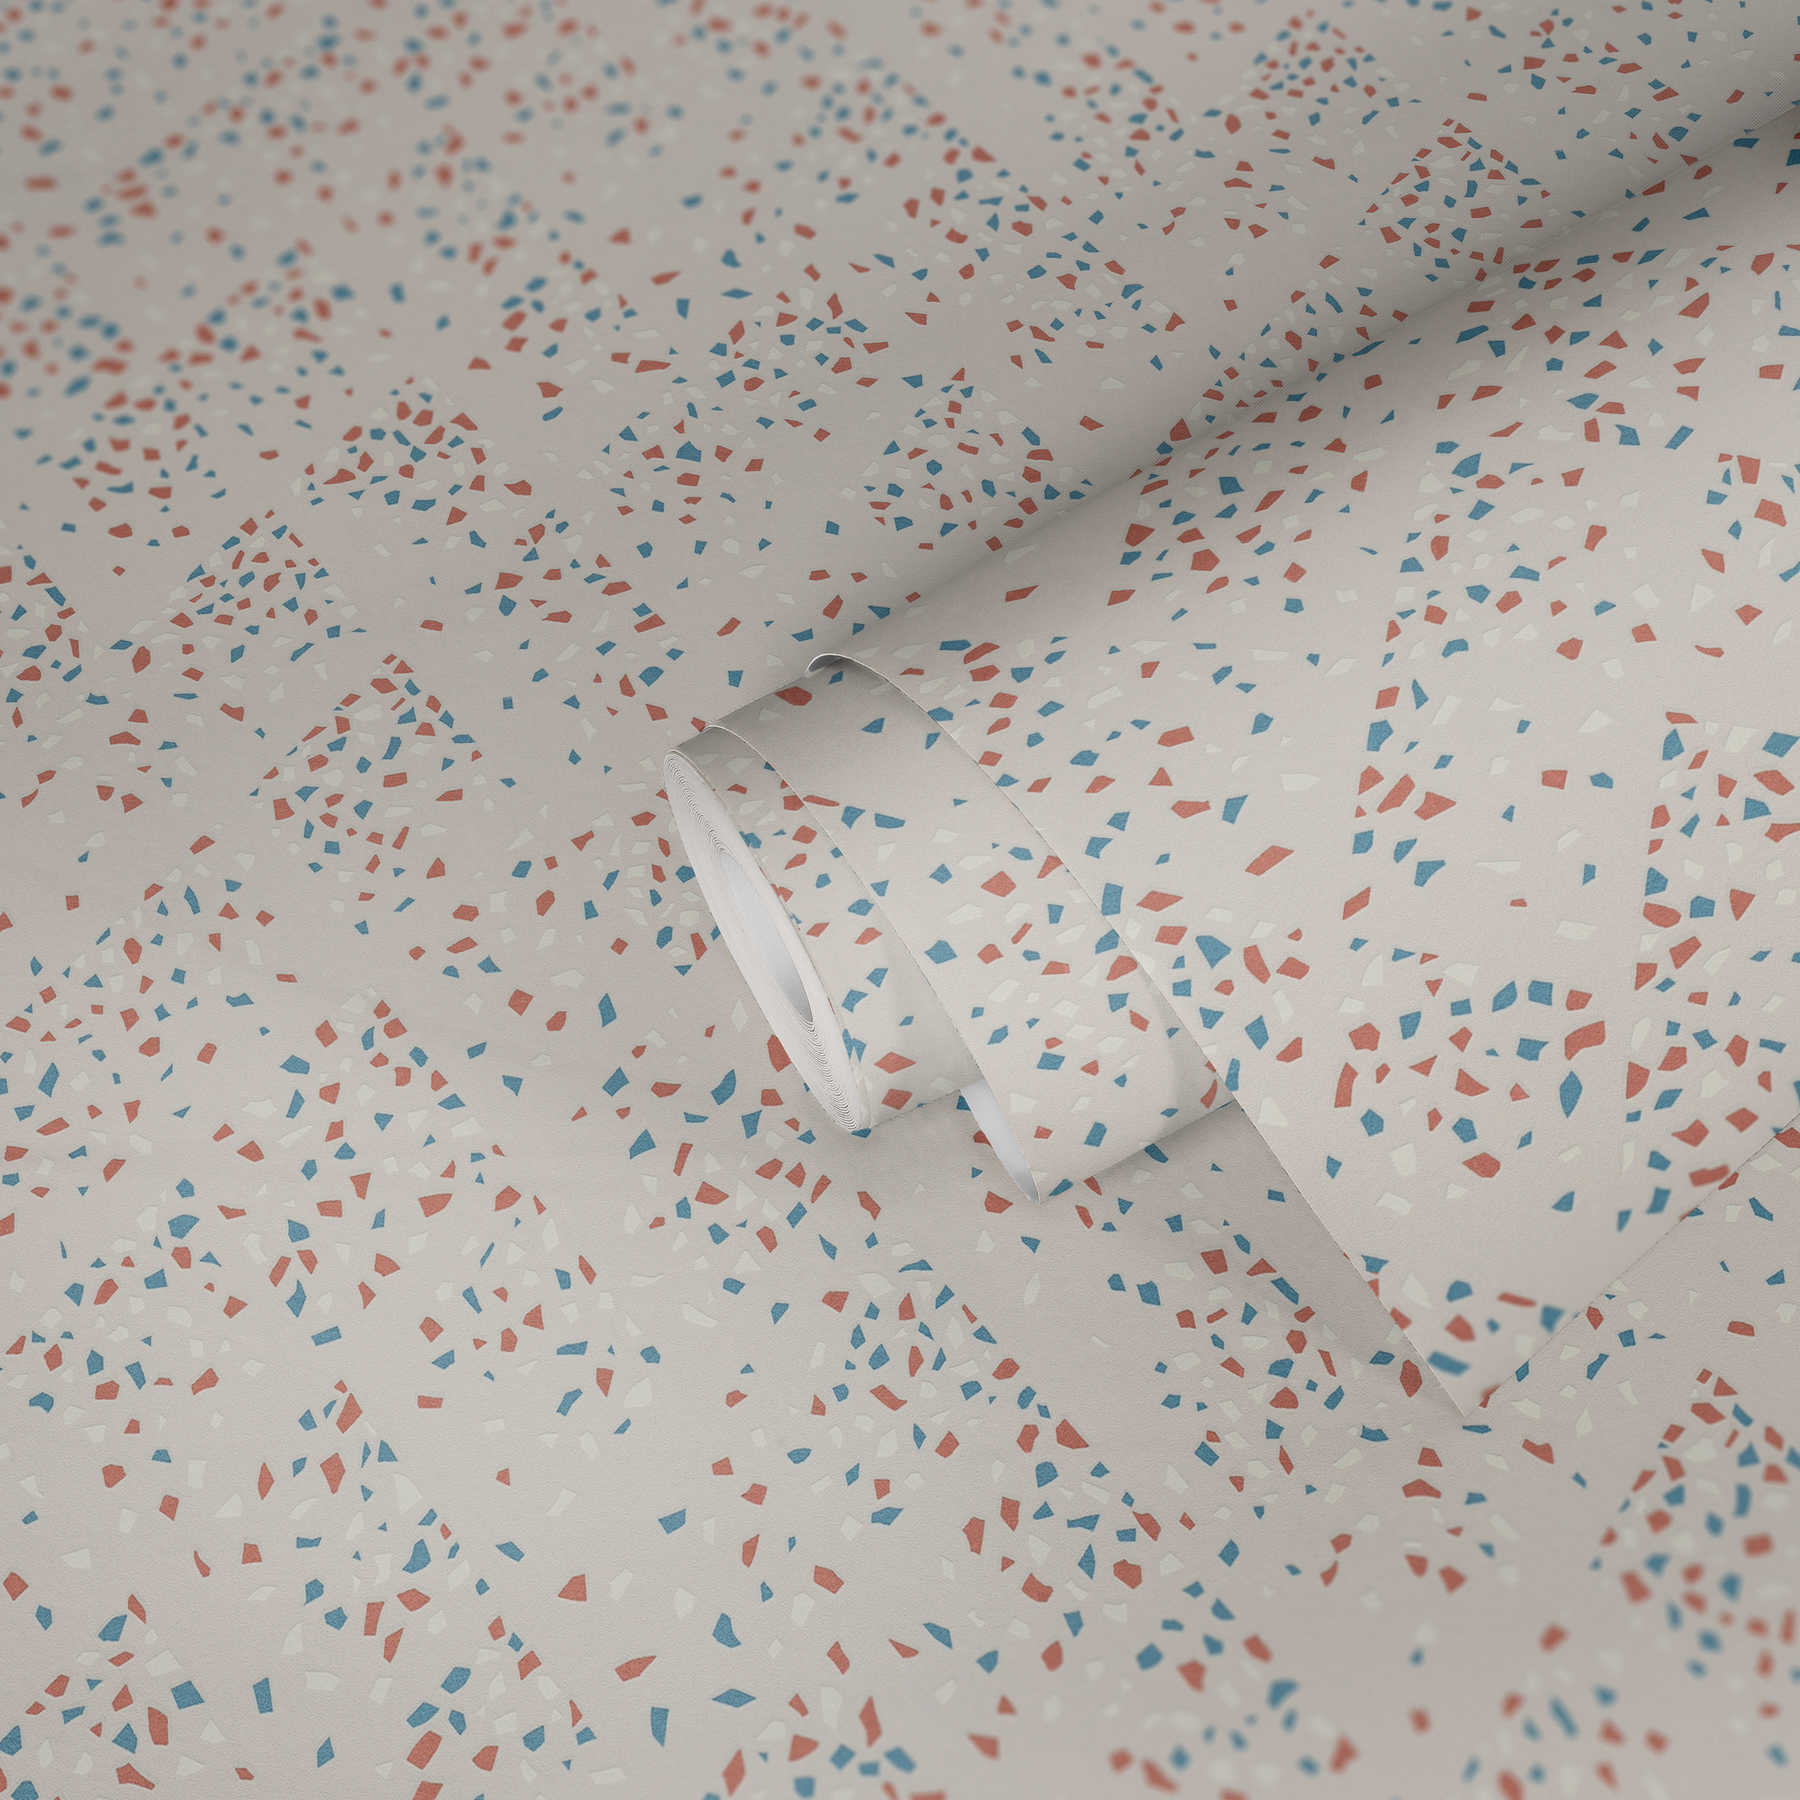             Non-woven wallpaper with terrazzo pattern - blue, pink, white
        